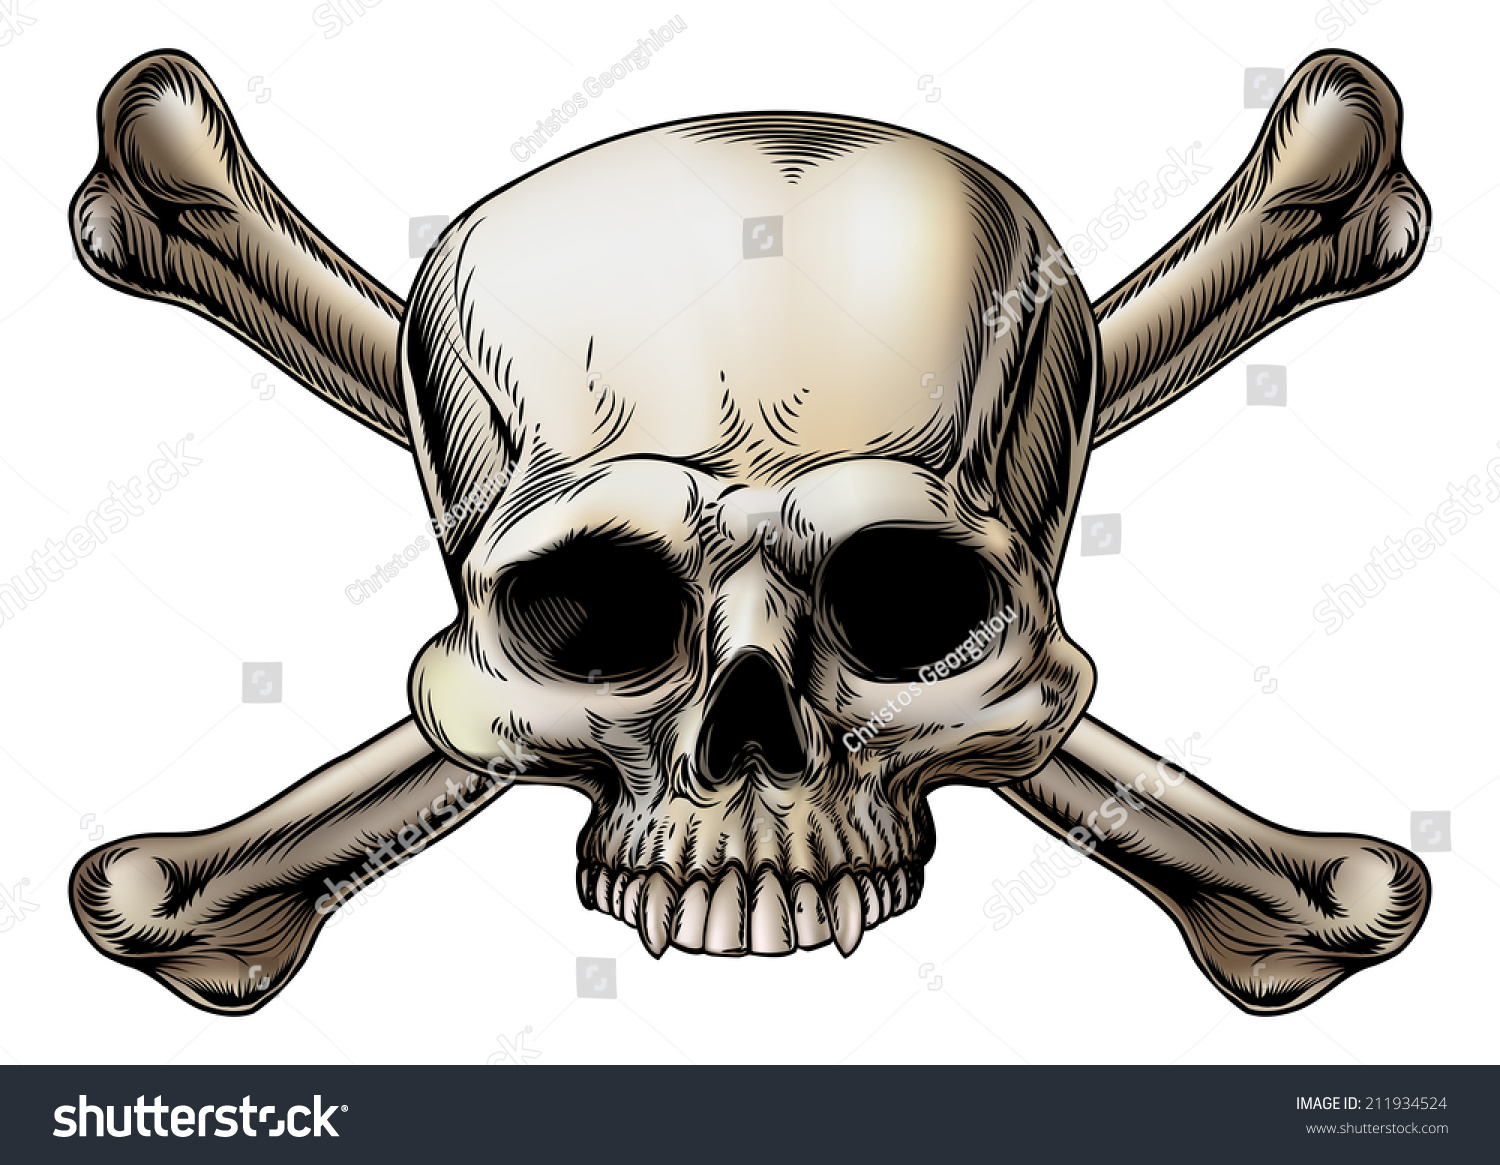 Skull And Crossbones Drawing With Skull In The Center Of The Crossed ...